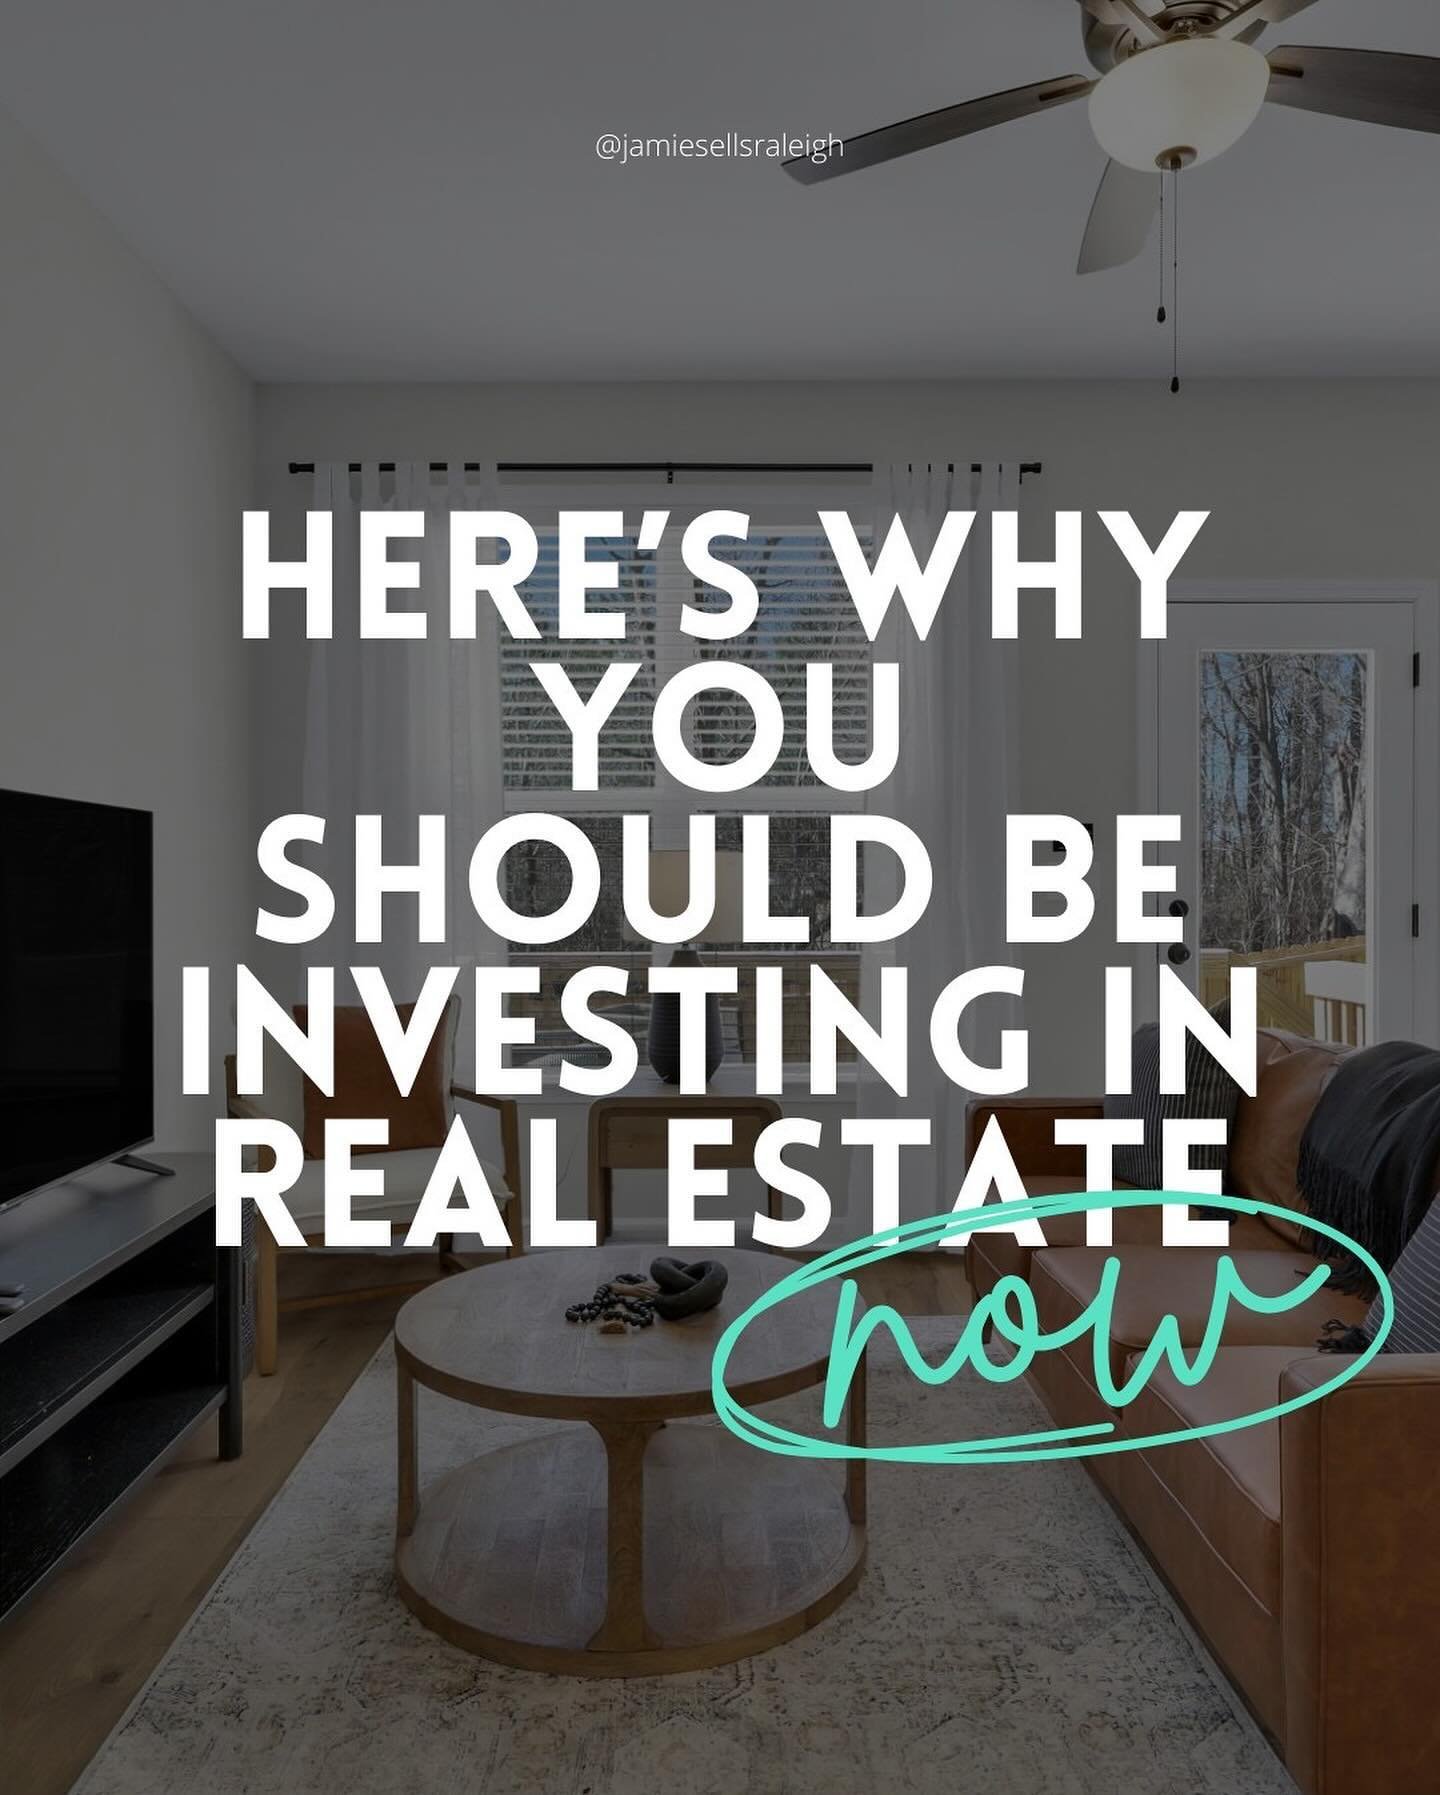 If you're not investing in real estate, 𝘆𝗼𝘂'𝗿𝗲 𝗯𝗲𝗵𝗶𝗻𝗱. 

Every day that you wait to buy a home is another day you lose out on equity. 

Whether you decide to get yourself into a midterm rental or want to flip houses, real estate is THE key